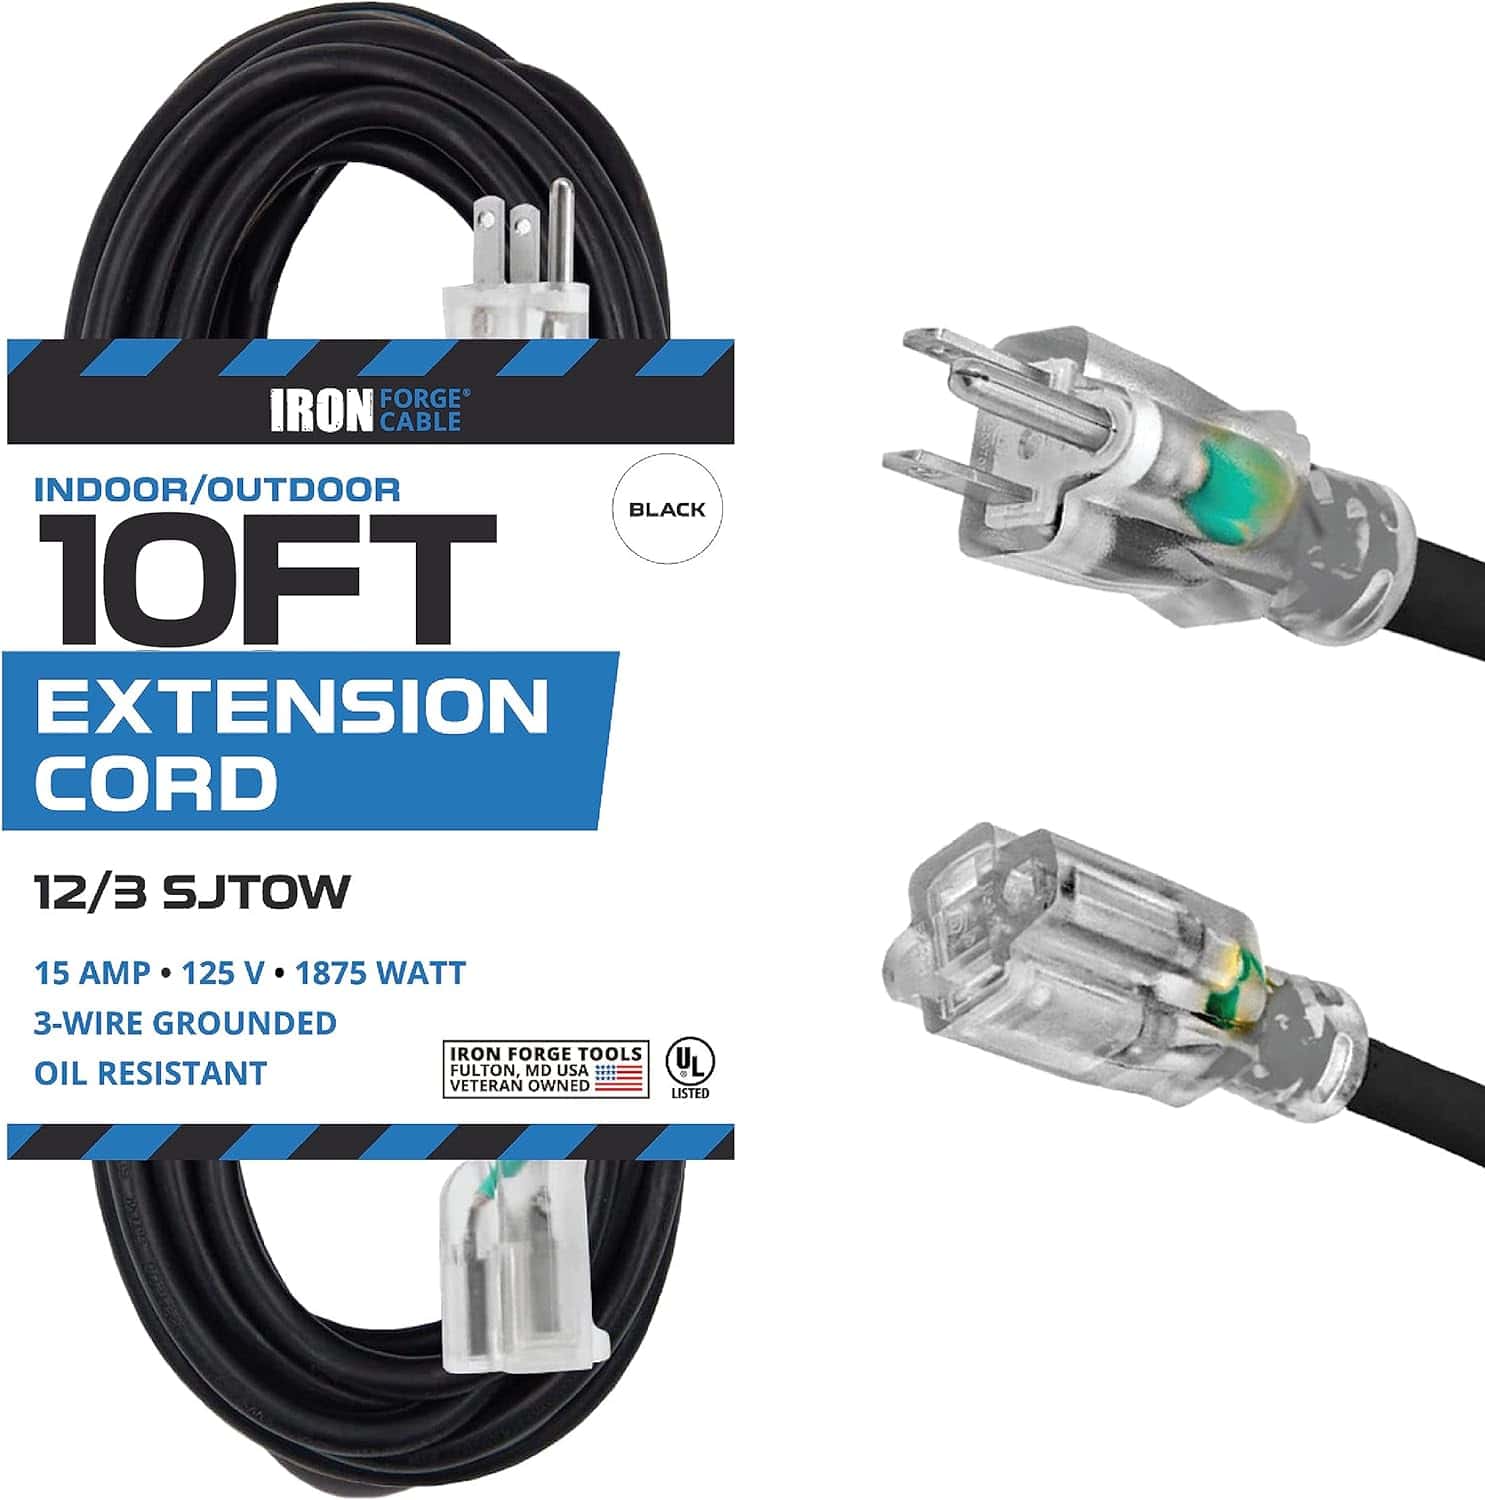 Iron-Forge-10-Ft-Heavy-Duty-Extension-Cord-Outdoor-SJTOW-Oil-Resistant-12-Gauge-Extension-Cord-10ft-with-3-Prong-12-3-Black-Extension-Cord-Great-for-Farm-Ranch-Workshop-15-AMP-US-Veteran-Owned